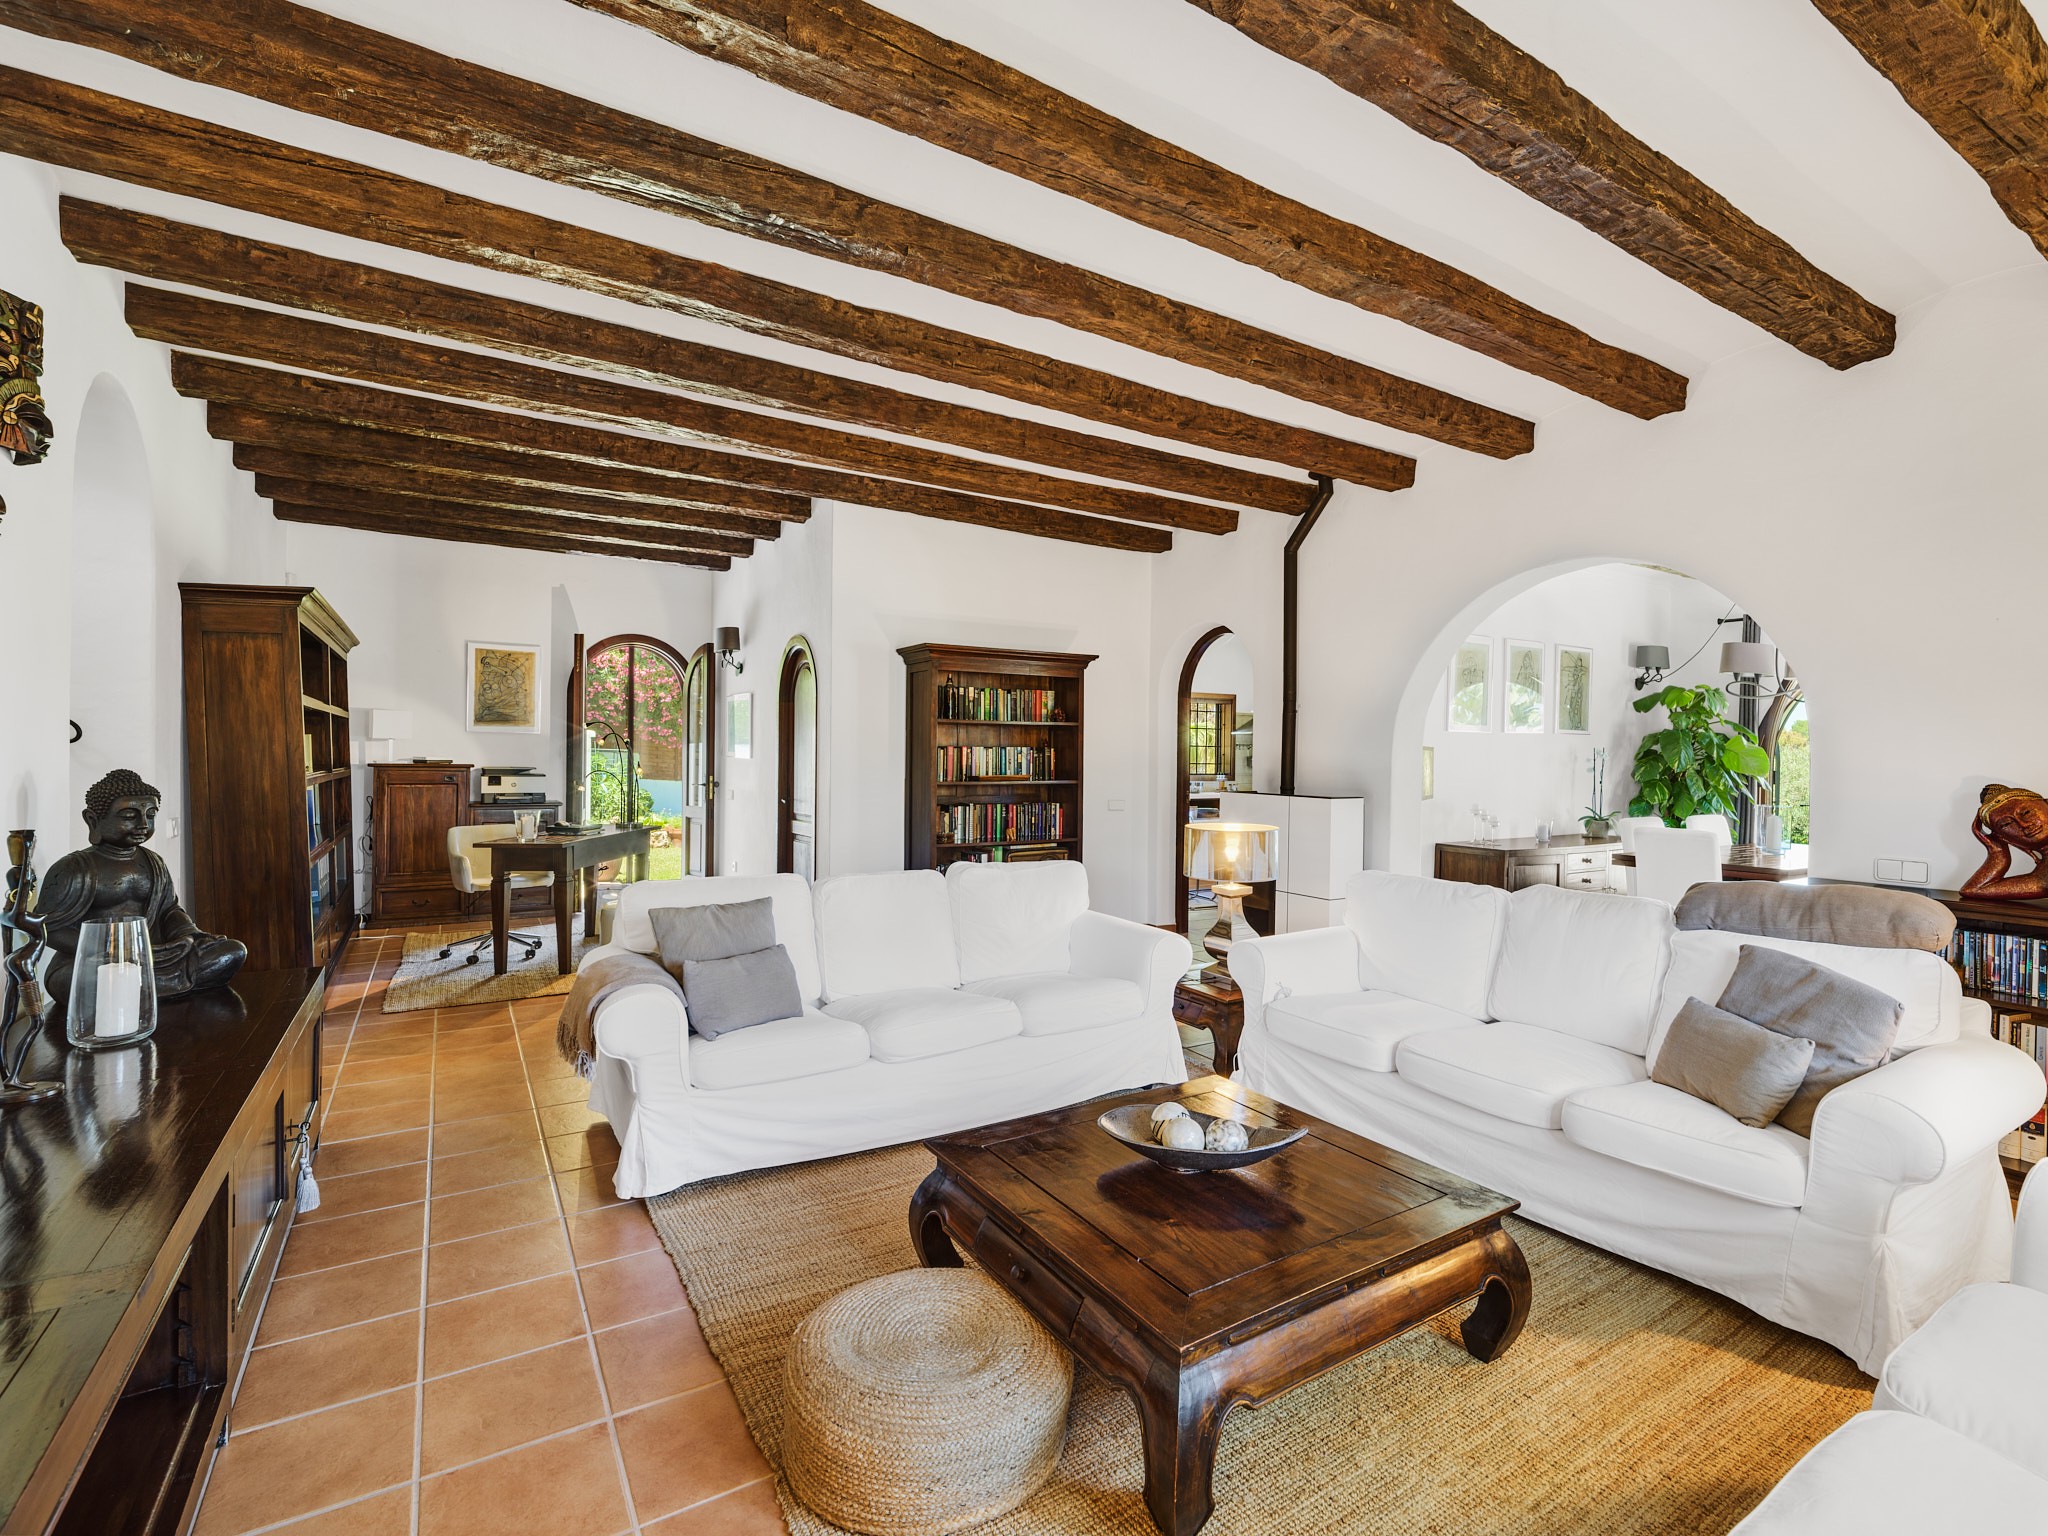 Perfectly maintained finca-style villa in central location - 4